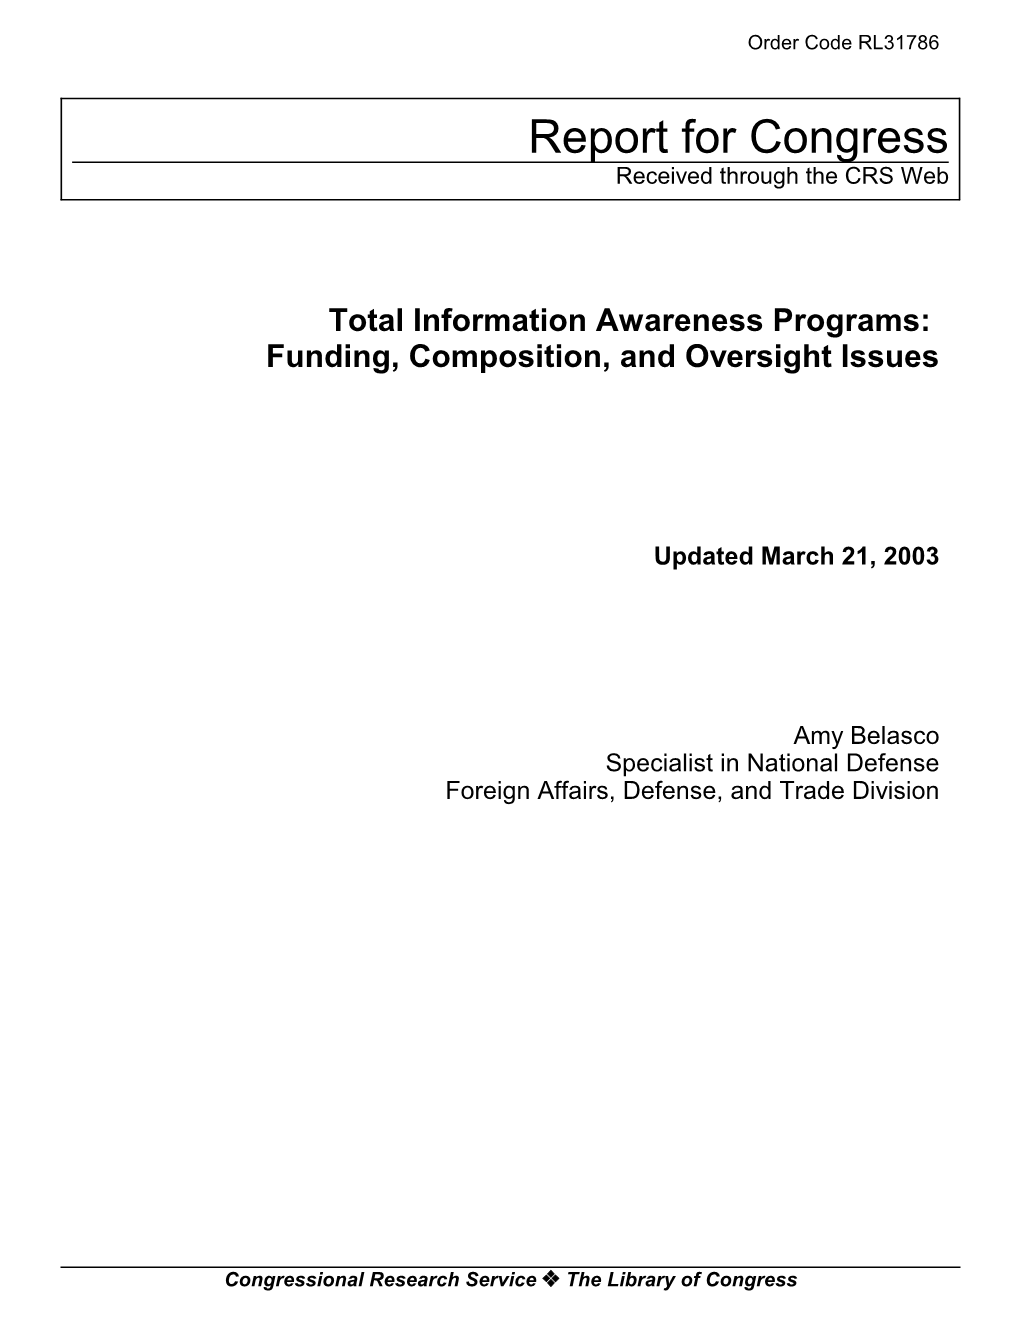 Total Information Awareness Programs: Funding, Composition, and Oversight Issues